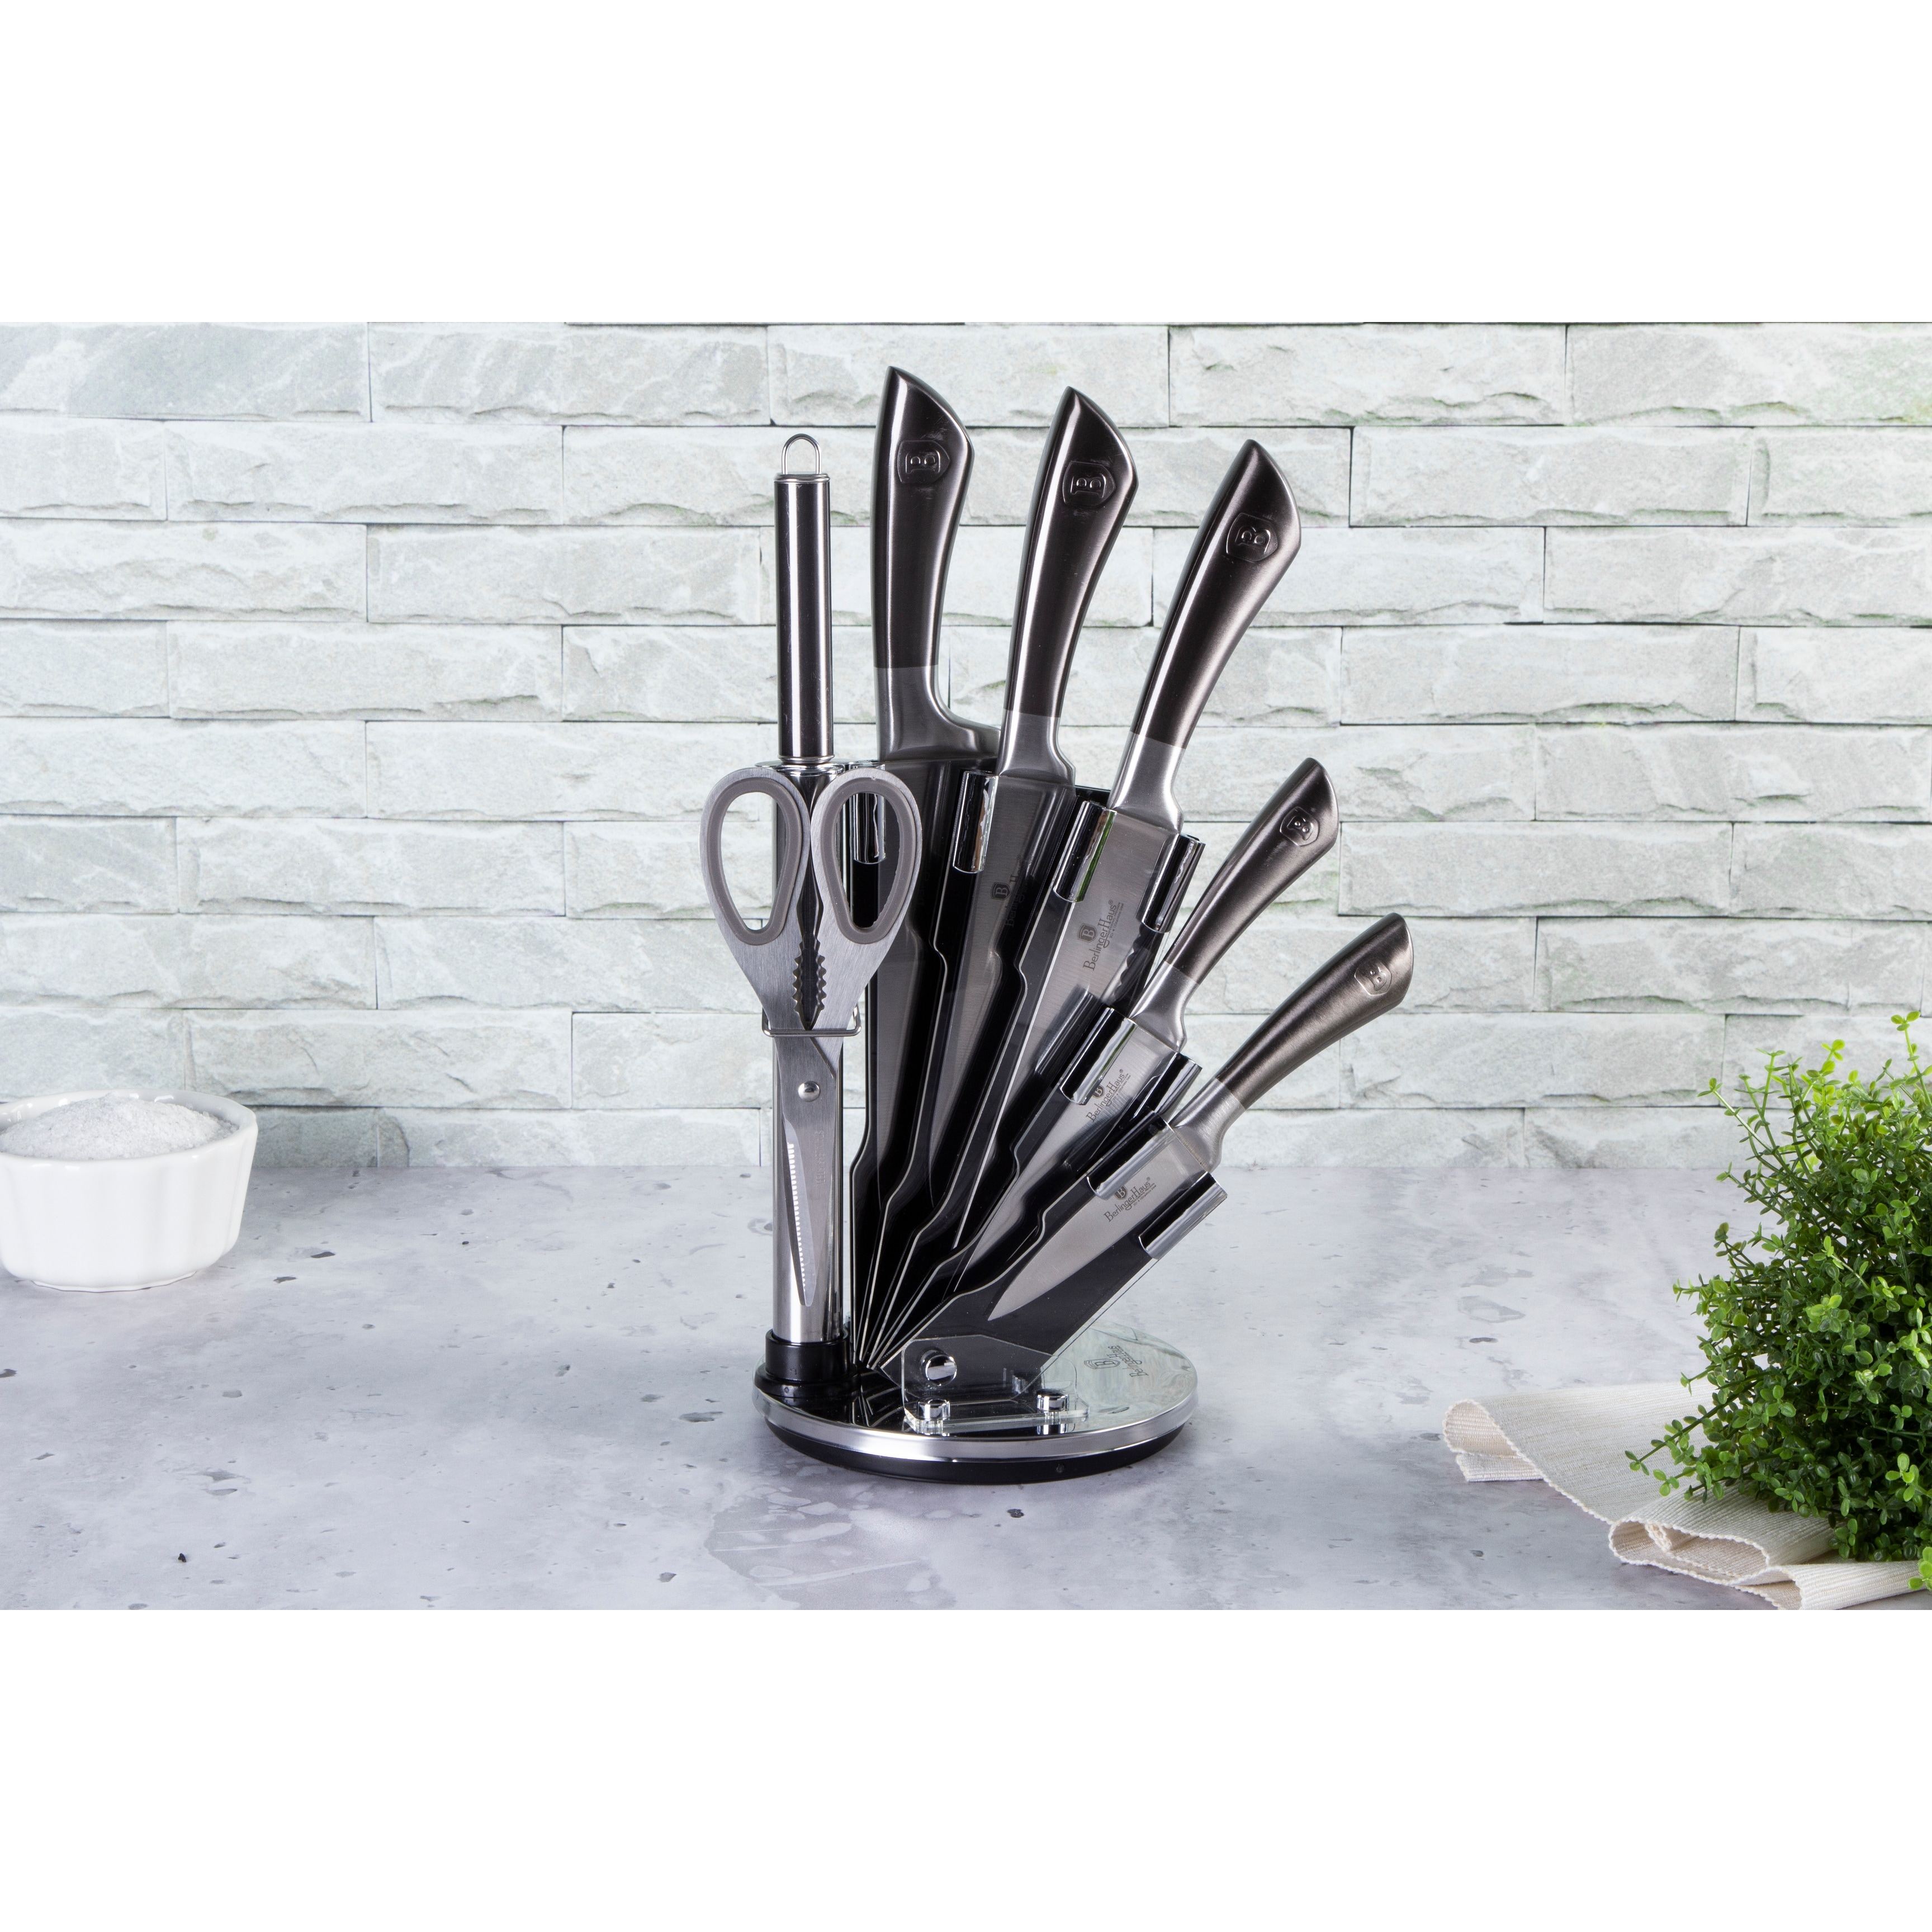 https://ak1.ostkcdn.com/images/products/is/images/direct/8a41d67f31efe1efe18fdd0c166b62046bd1a46f/8-Piece-Knife-Set-w--Acrylic-Stand%2C-Carbon-Collection.jpg